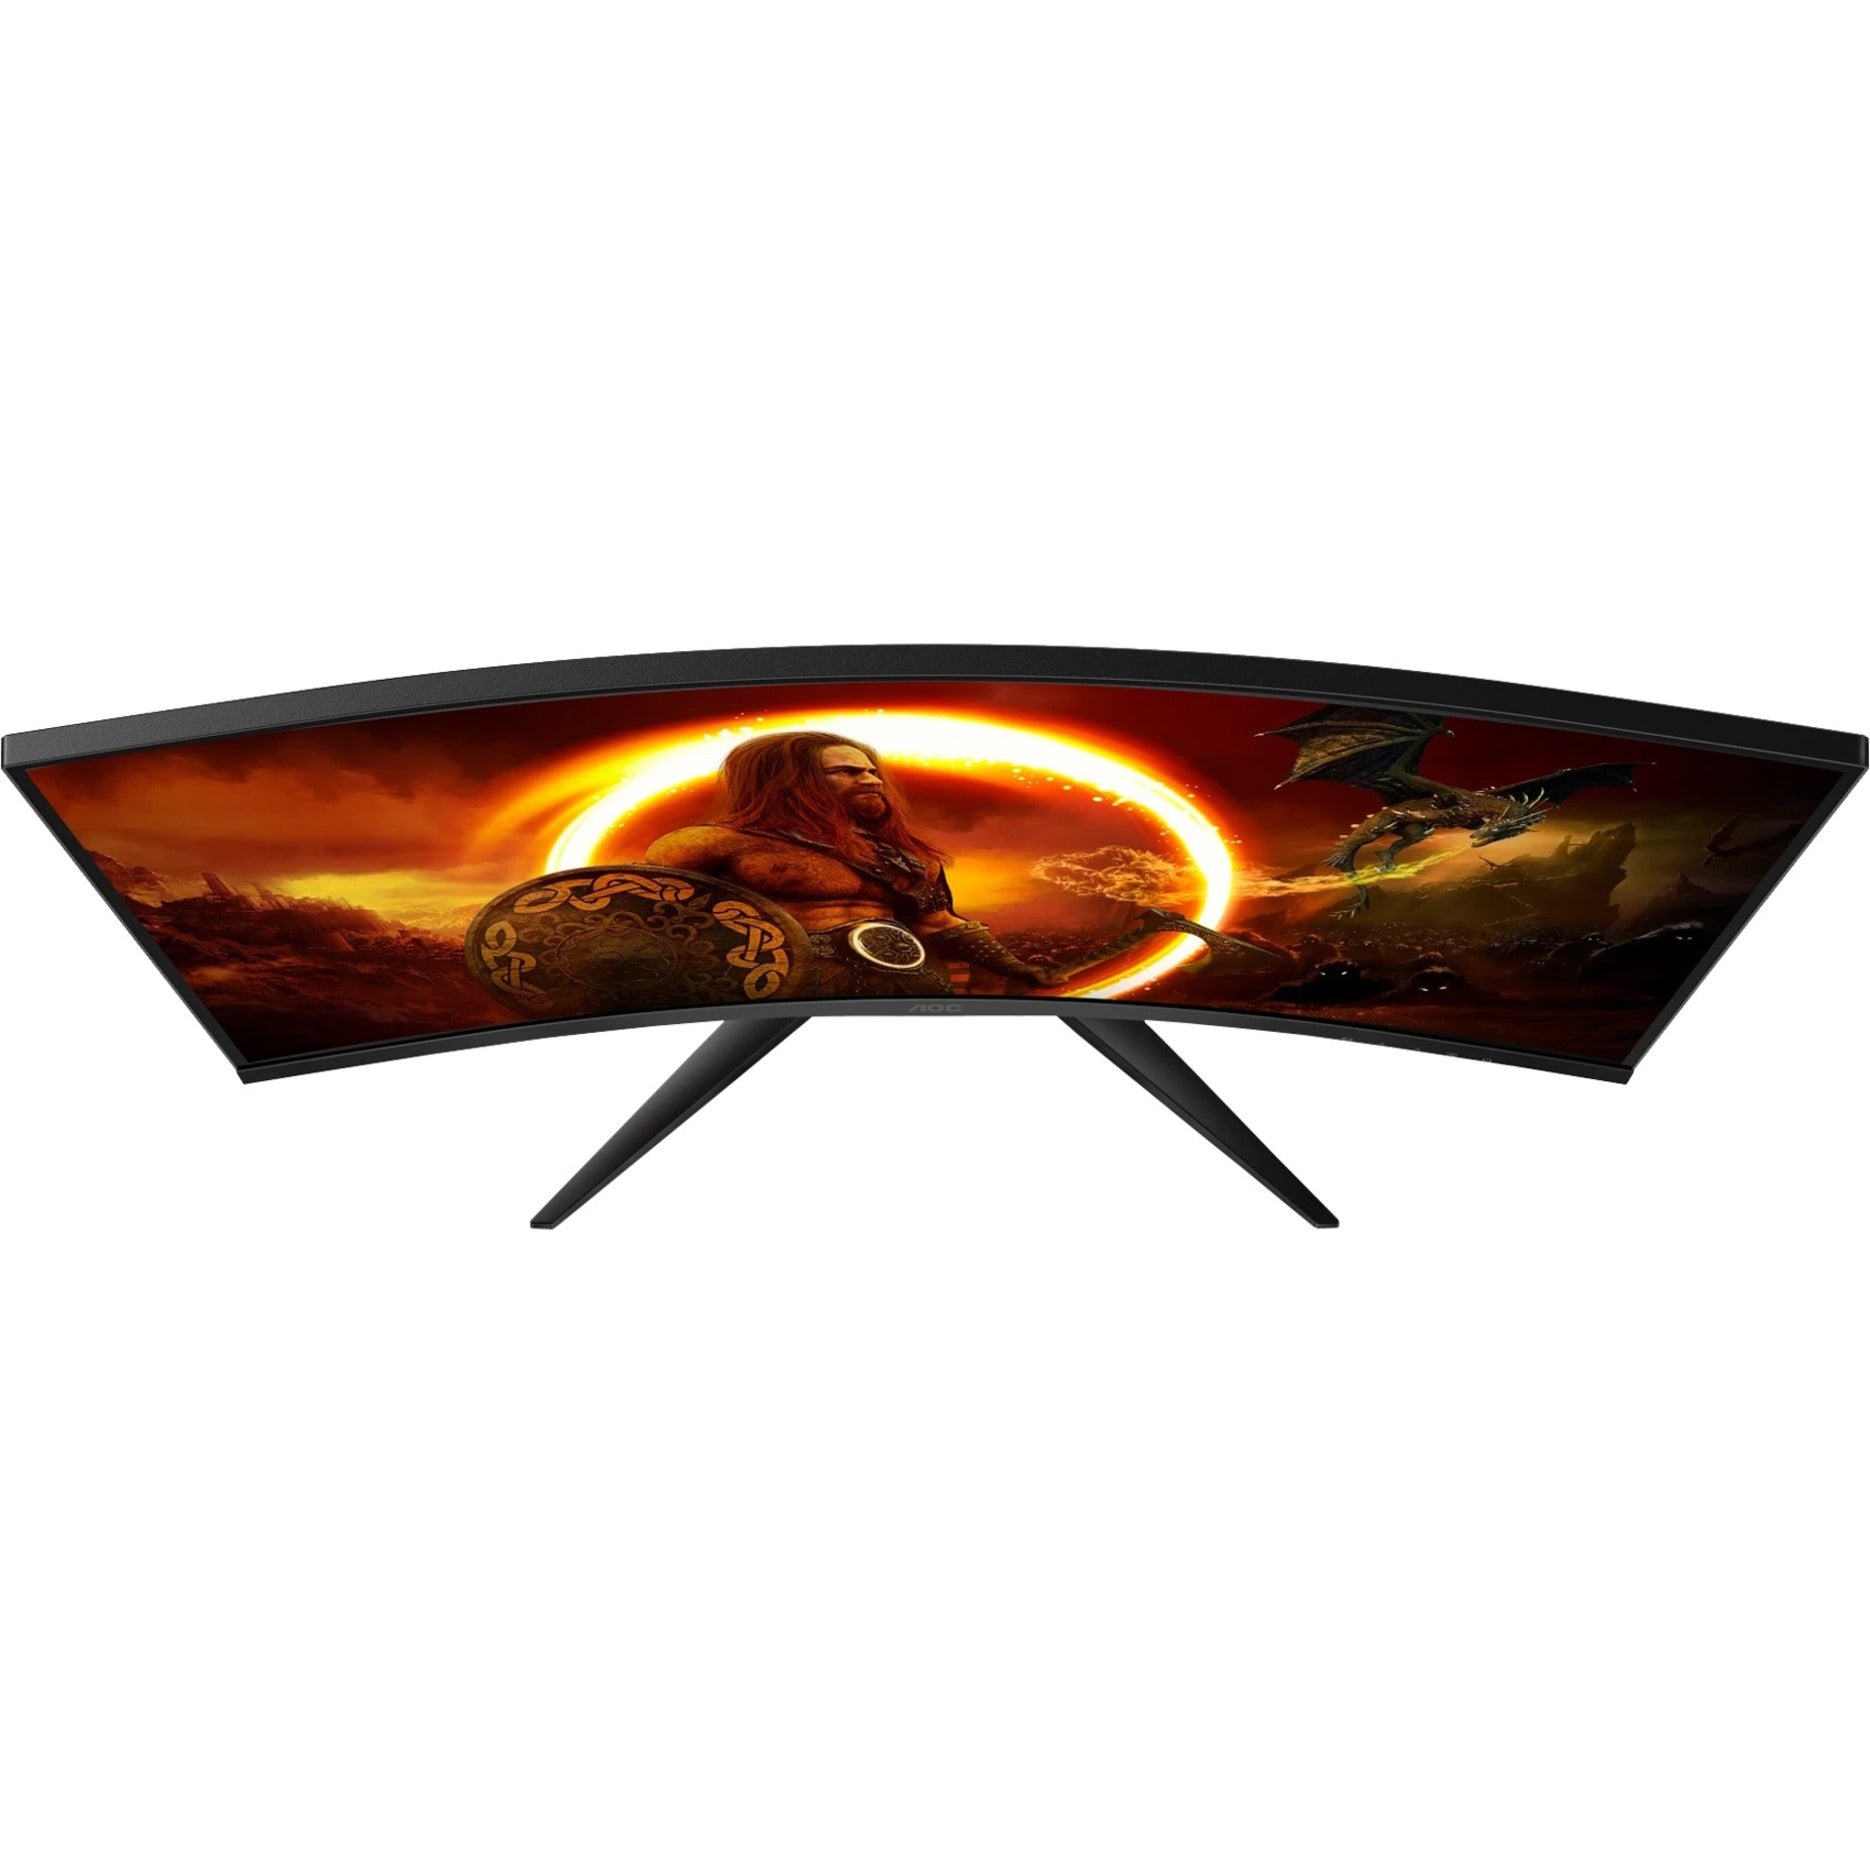 AOC C32G2E Curved Gaming Monitor, 31.5" Full HD, 165Hz Refresh Rate, FreeSync, Red/Black